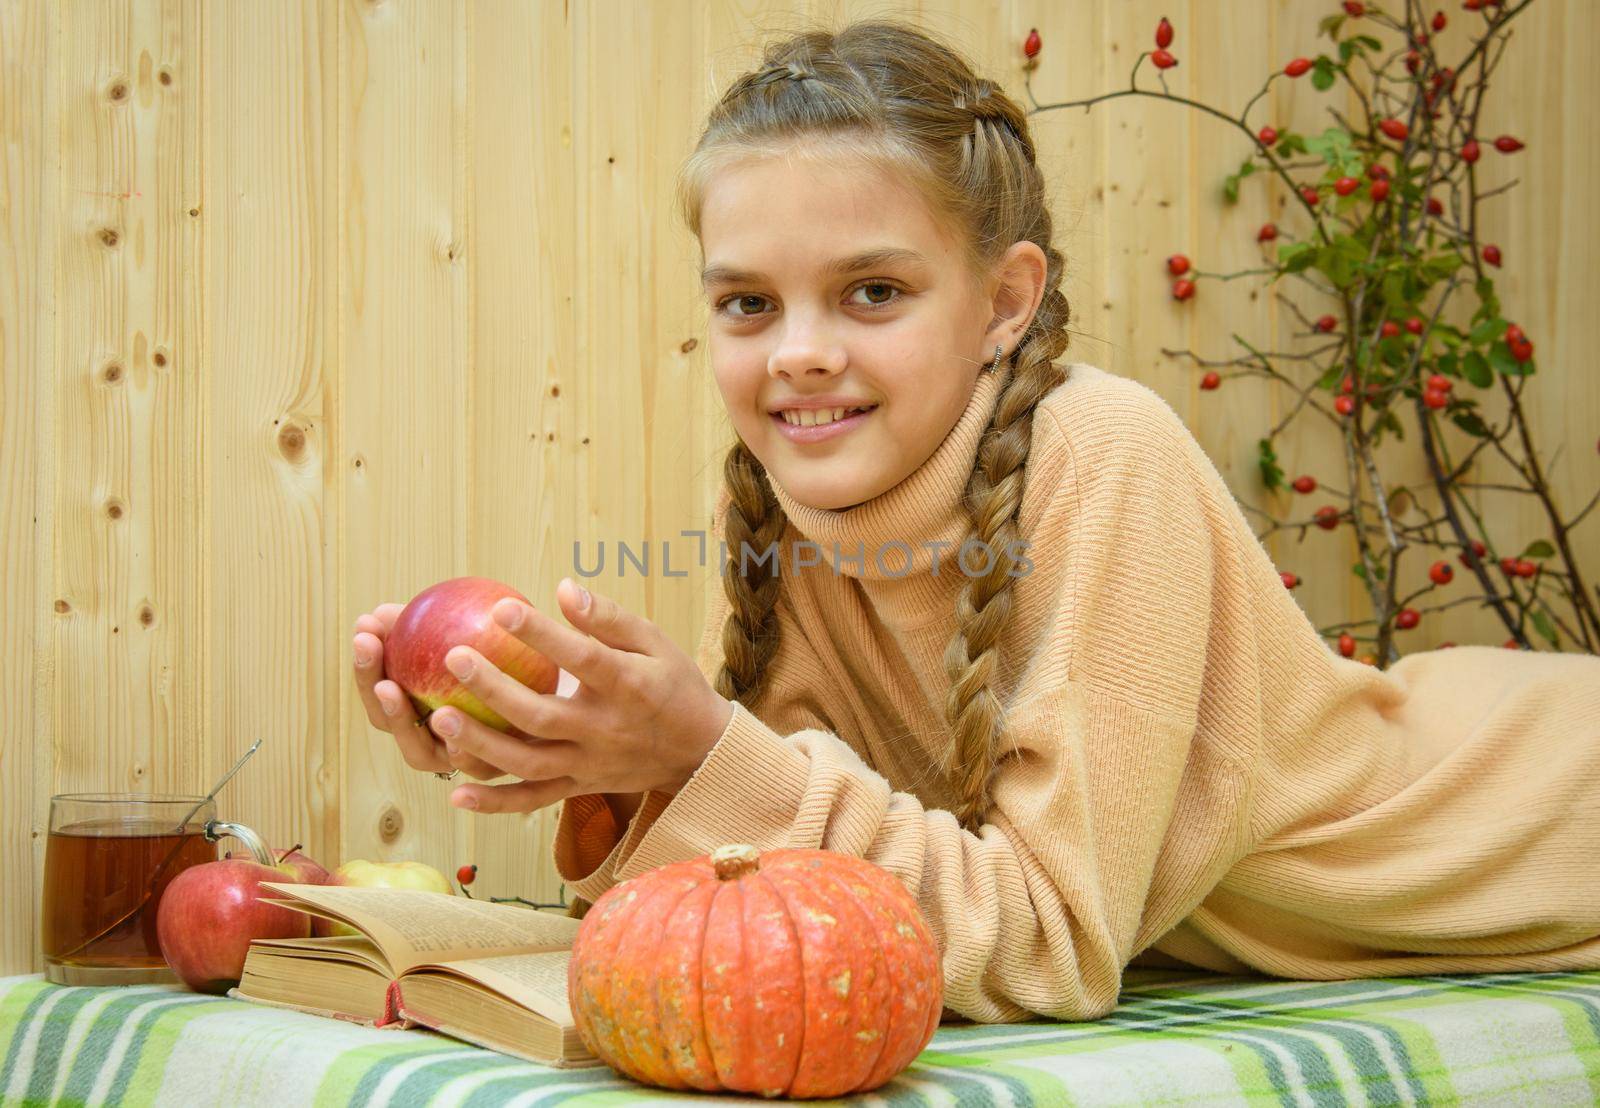 A girl lying down reads a book, holds an apple in her hands and looks happily into the frame